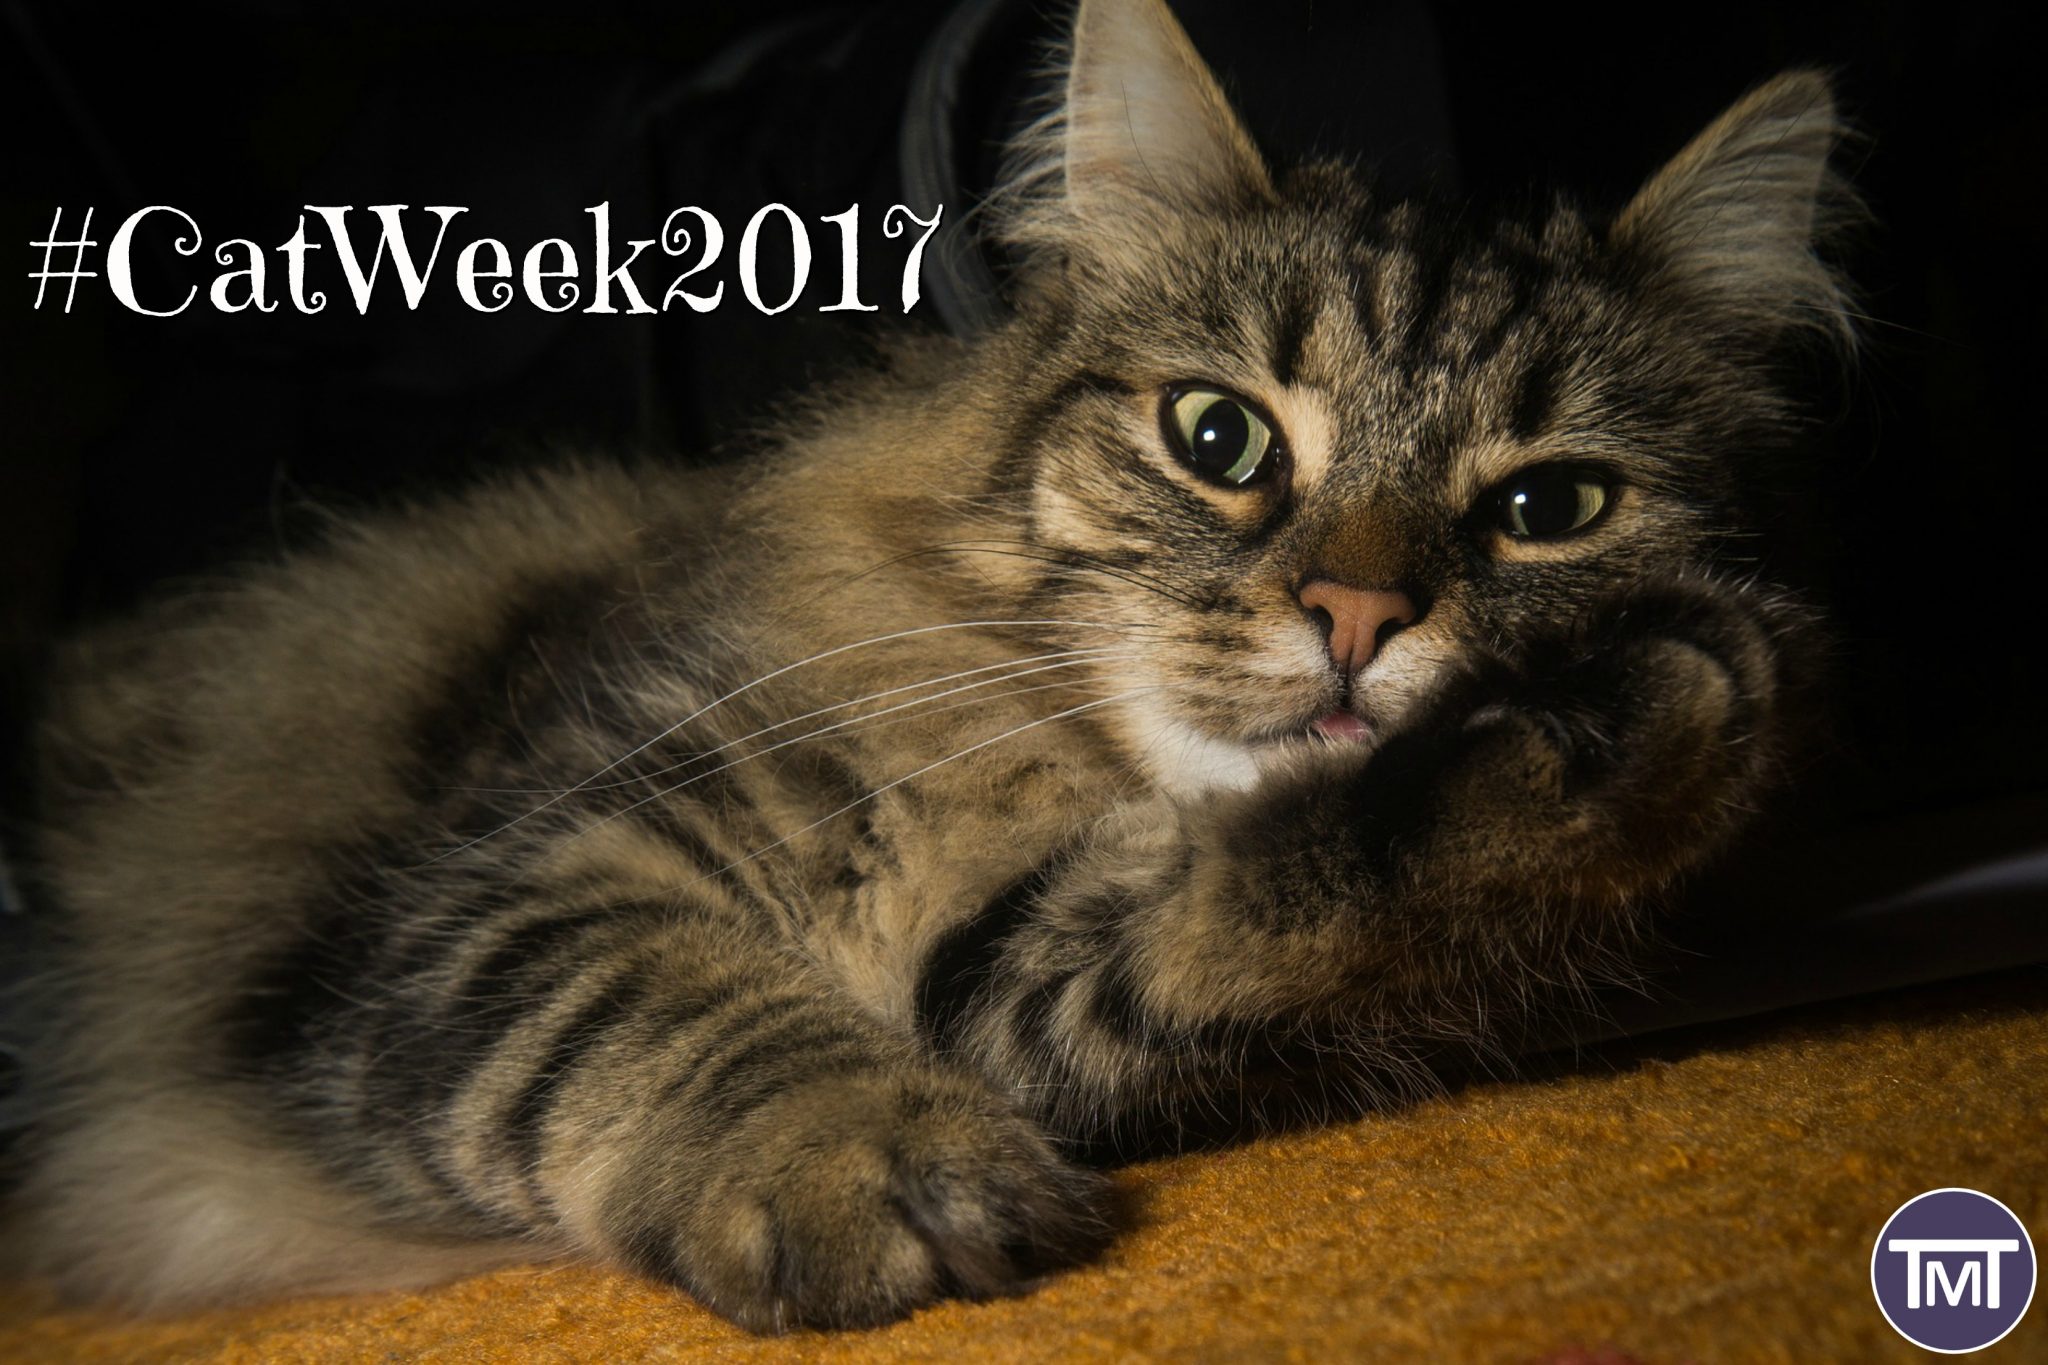 #catweek2017 feature pic cat lying down